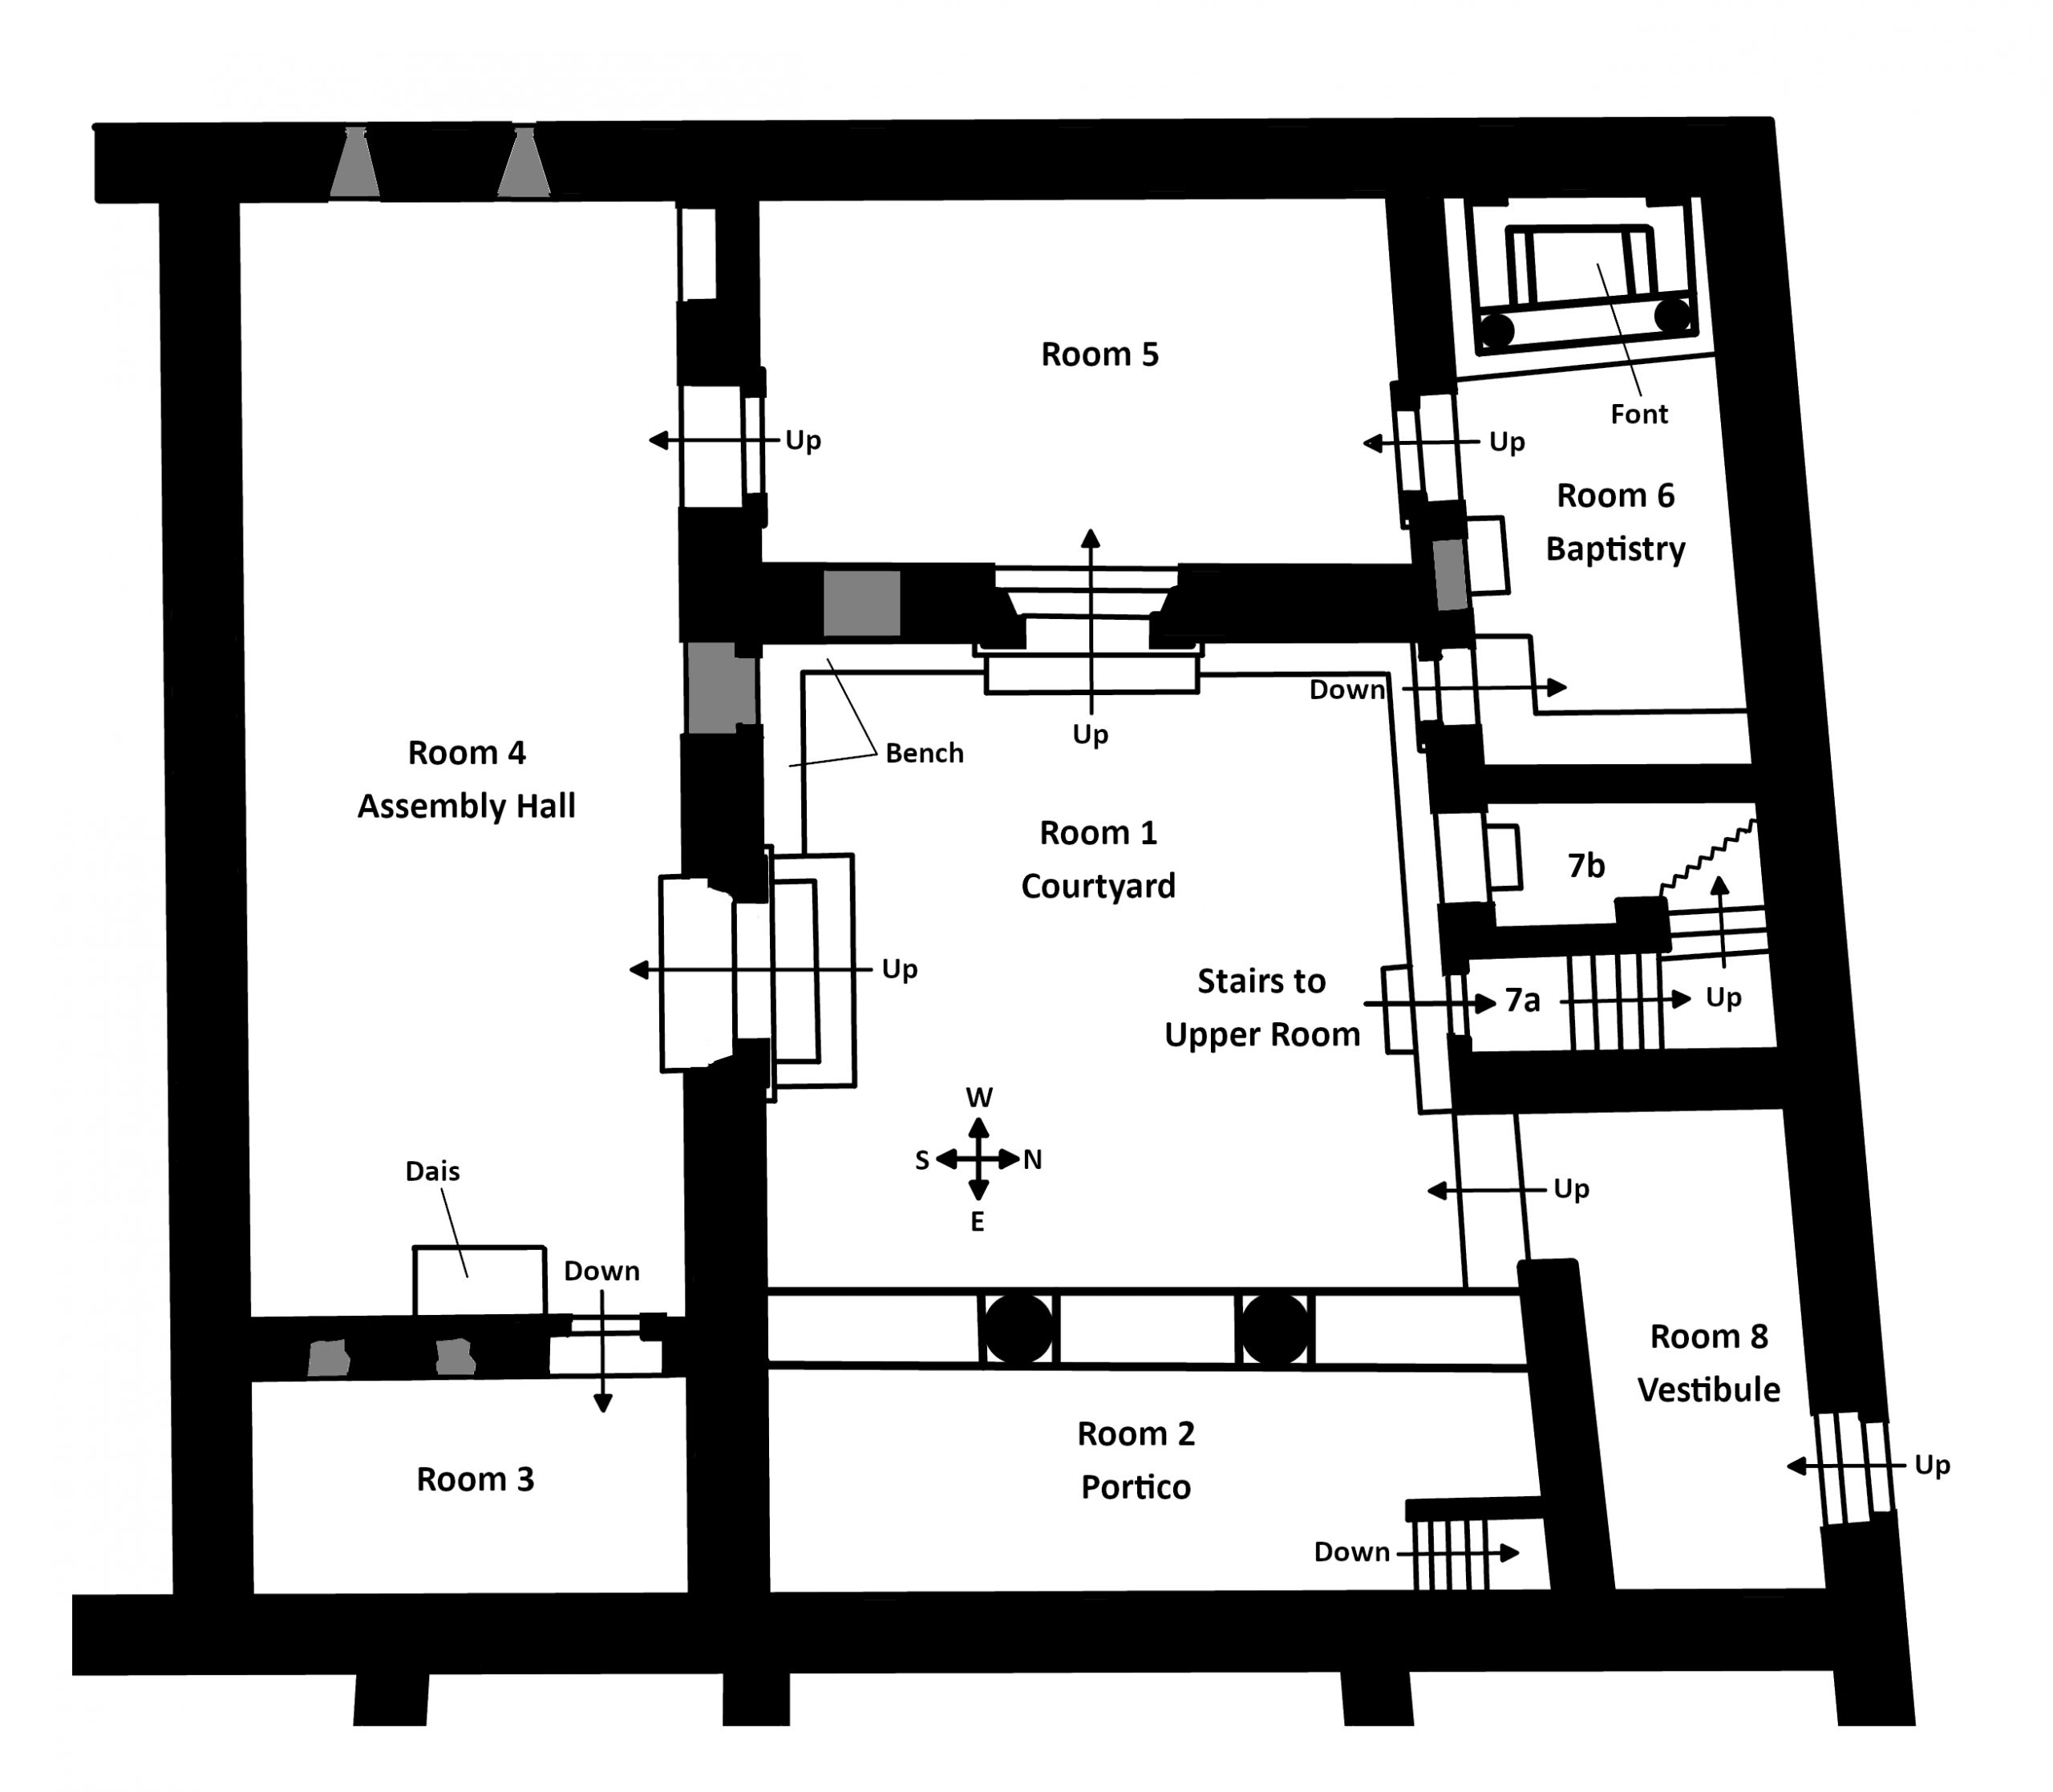 Floor plan of the Christian building at Dura Europos after renovation